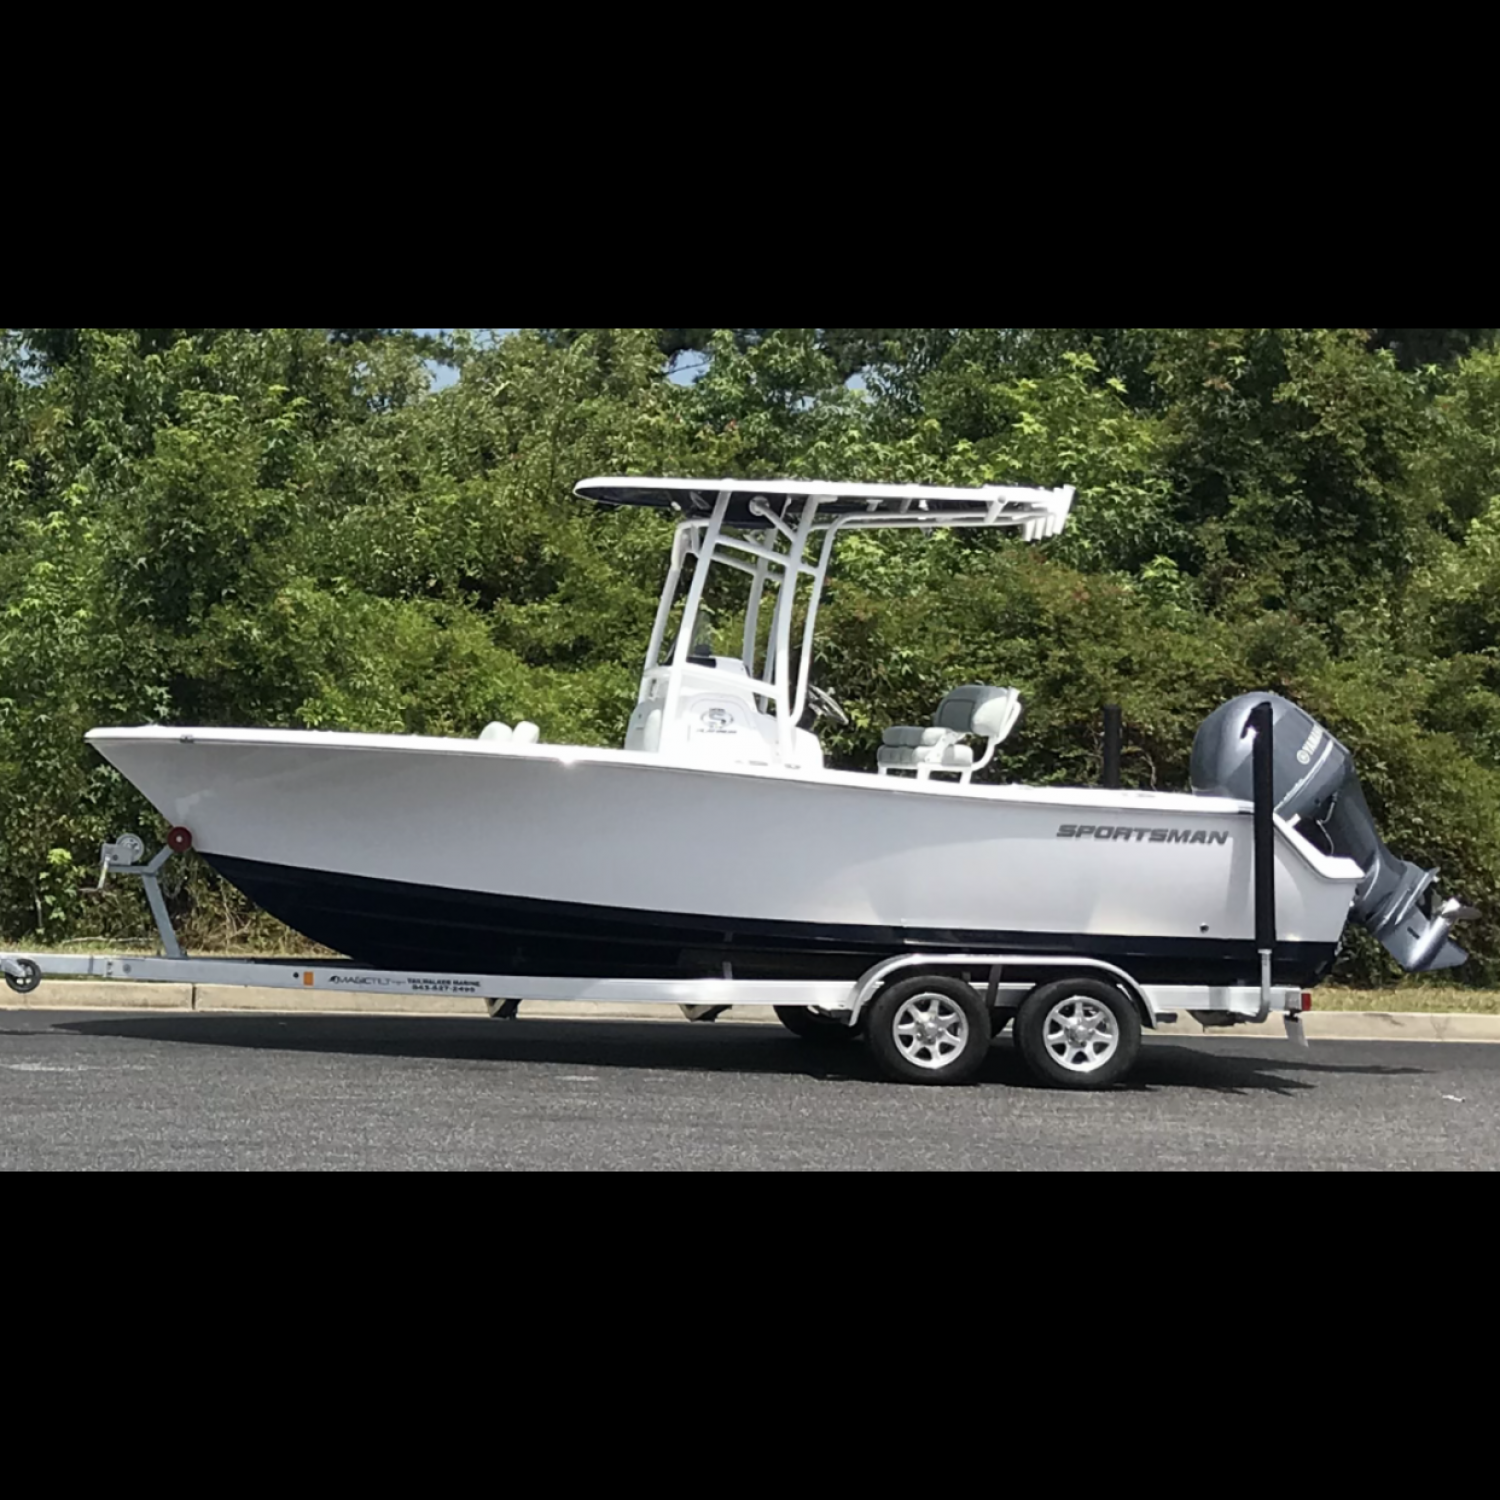 Just picked up my new Open 212. Traded in an Island Reef and couldn’t be happier with my choice...